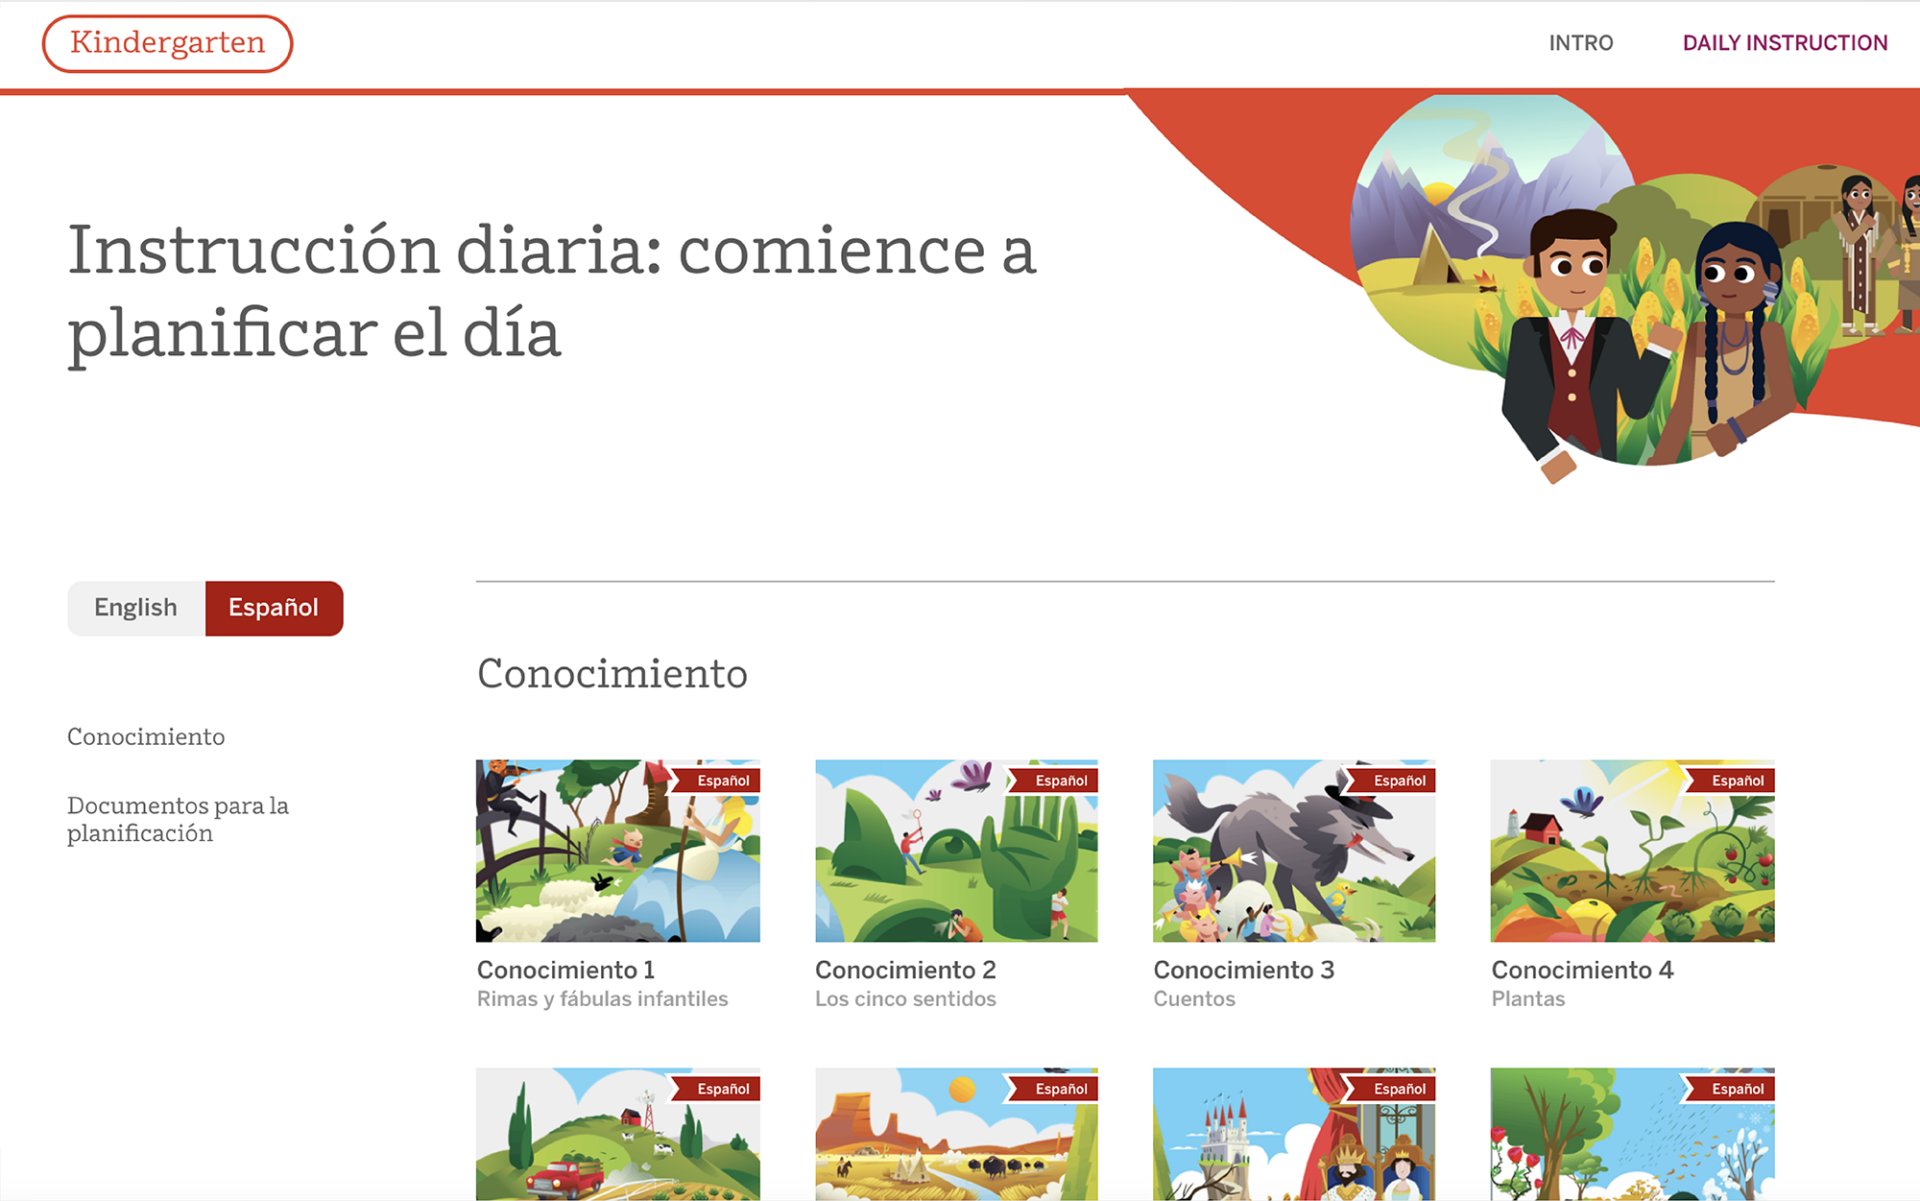 Screenshot of a bilingual educational website's homepage for kindergarten with navigation tabs and illustrated educational content in spanish.